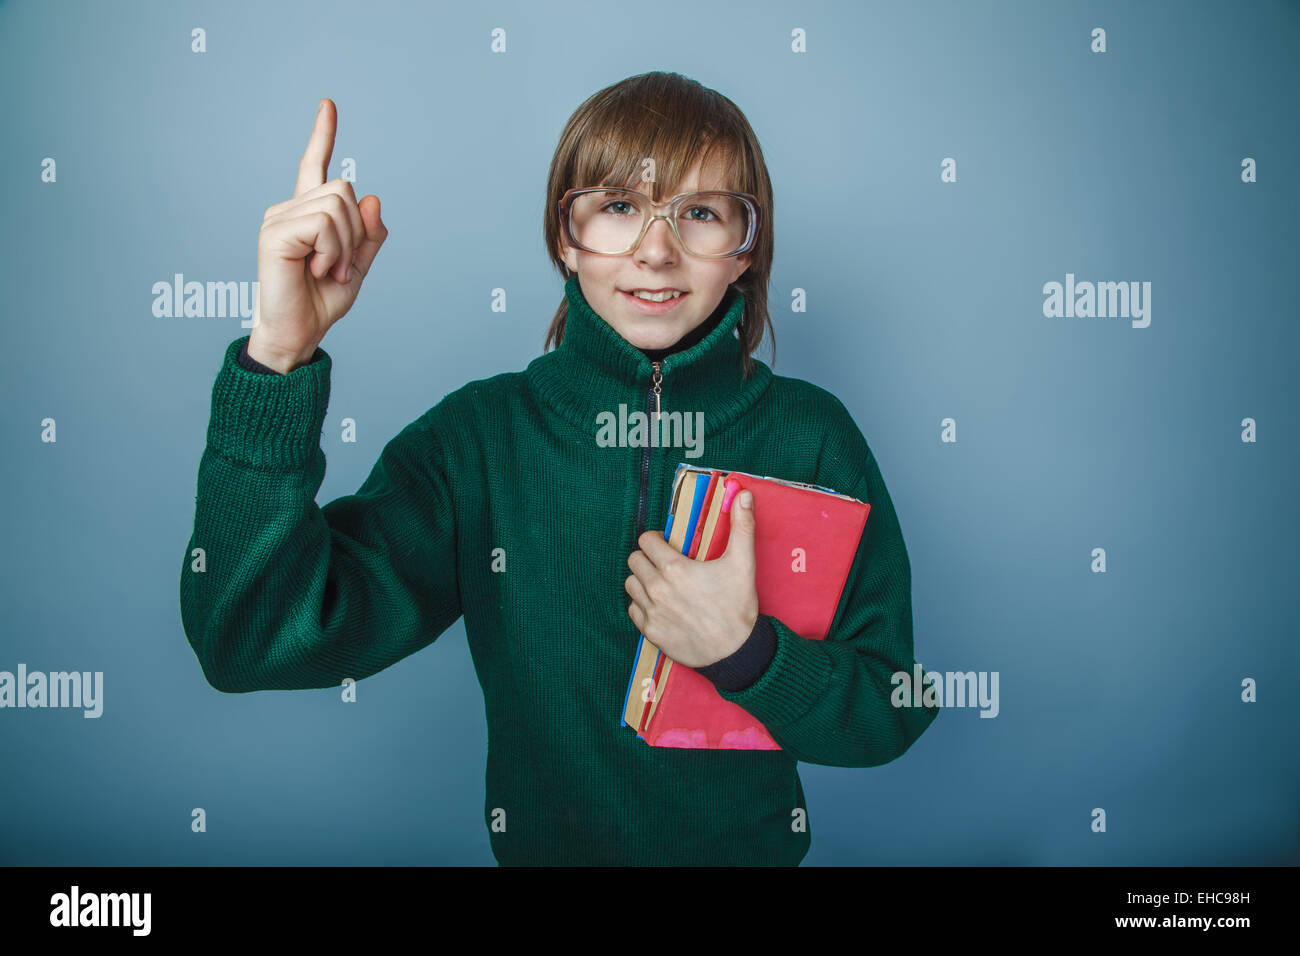 teenager boy brown hair European appearance in green sweater wit Stock Photo